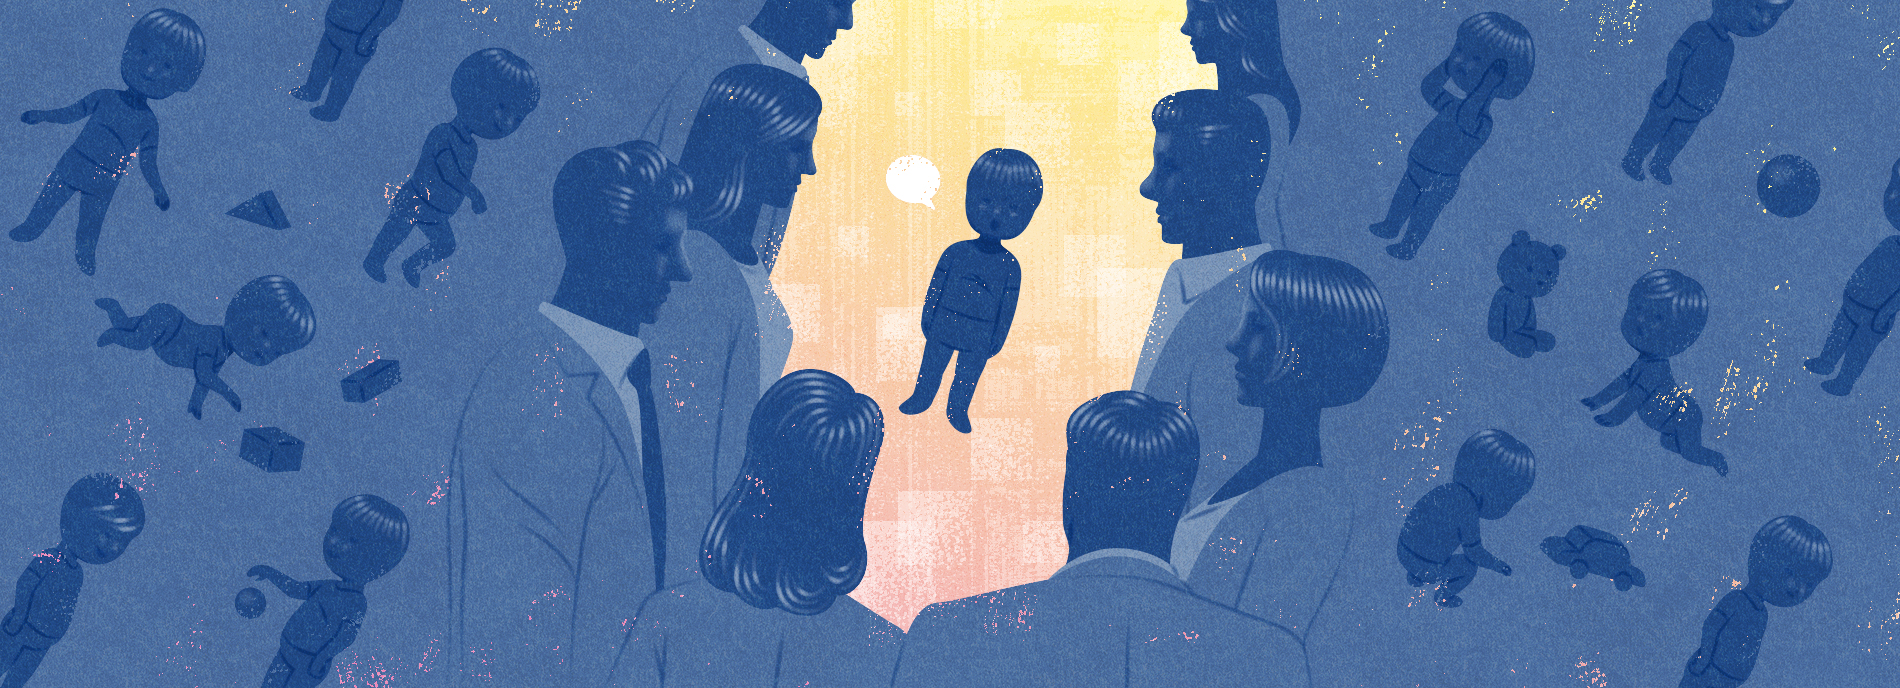 Illustration: a child stands in the center of a crowd, looking confused.